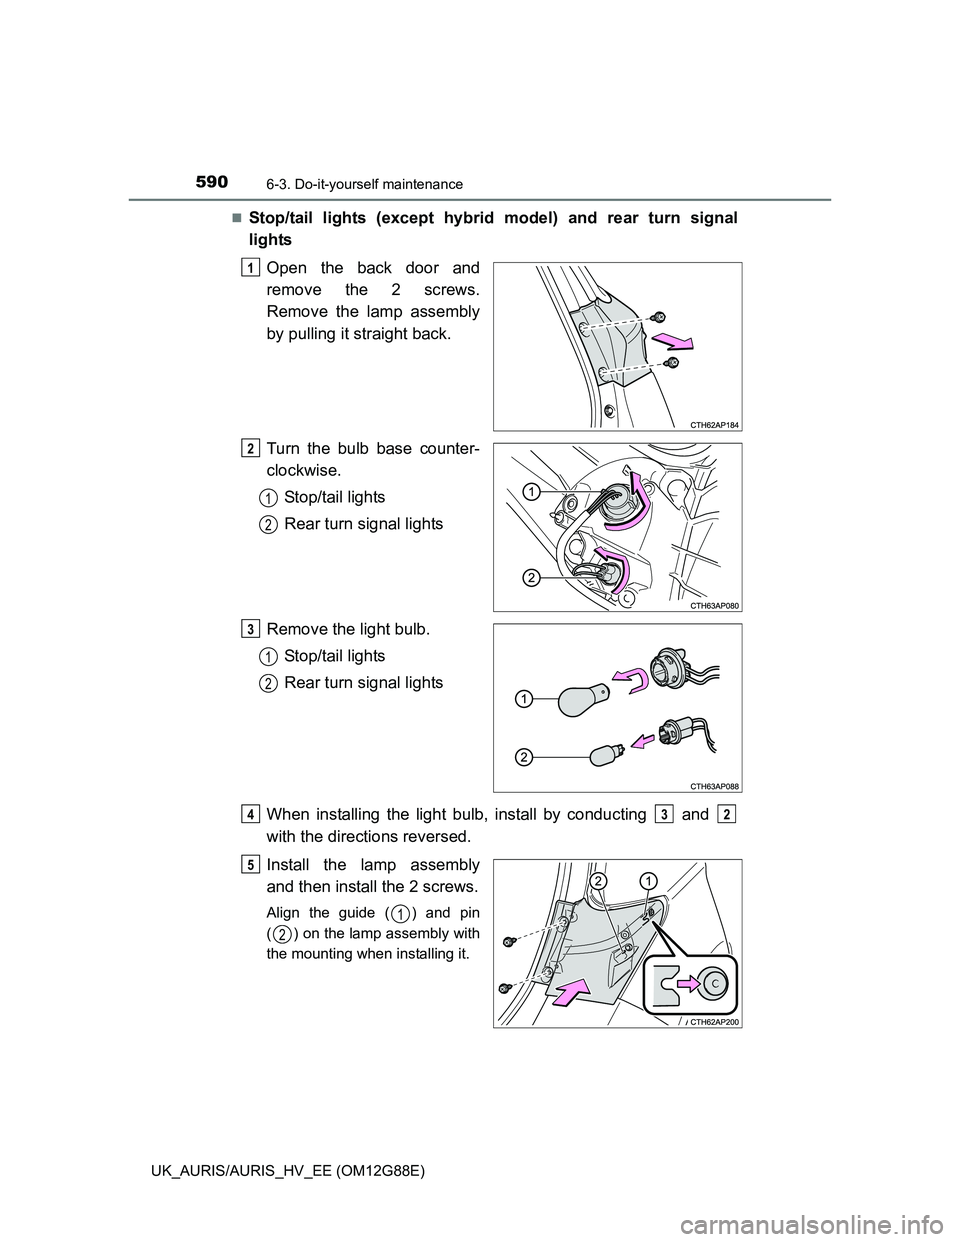 TOYOTA AURIS HYBRID 2014  Owners Manual 5906-3. Do-it-yourself maintenance
UK_AURIS/AURIS_HV_EE (OM12G88E)
Stop/tail lights (except hybrid model) and rear turn signal
lights
Open the back door and
remove the 2 screws.
Remove the lamp ass